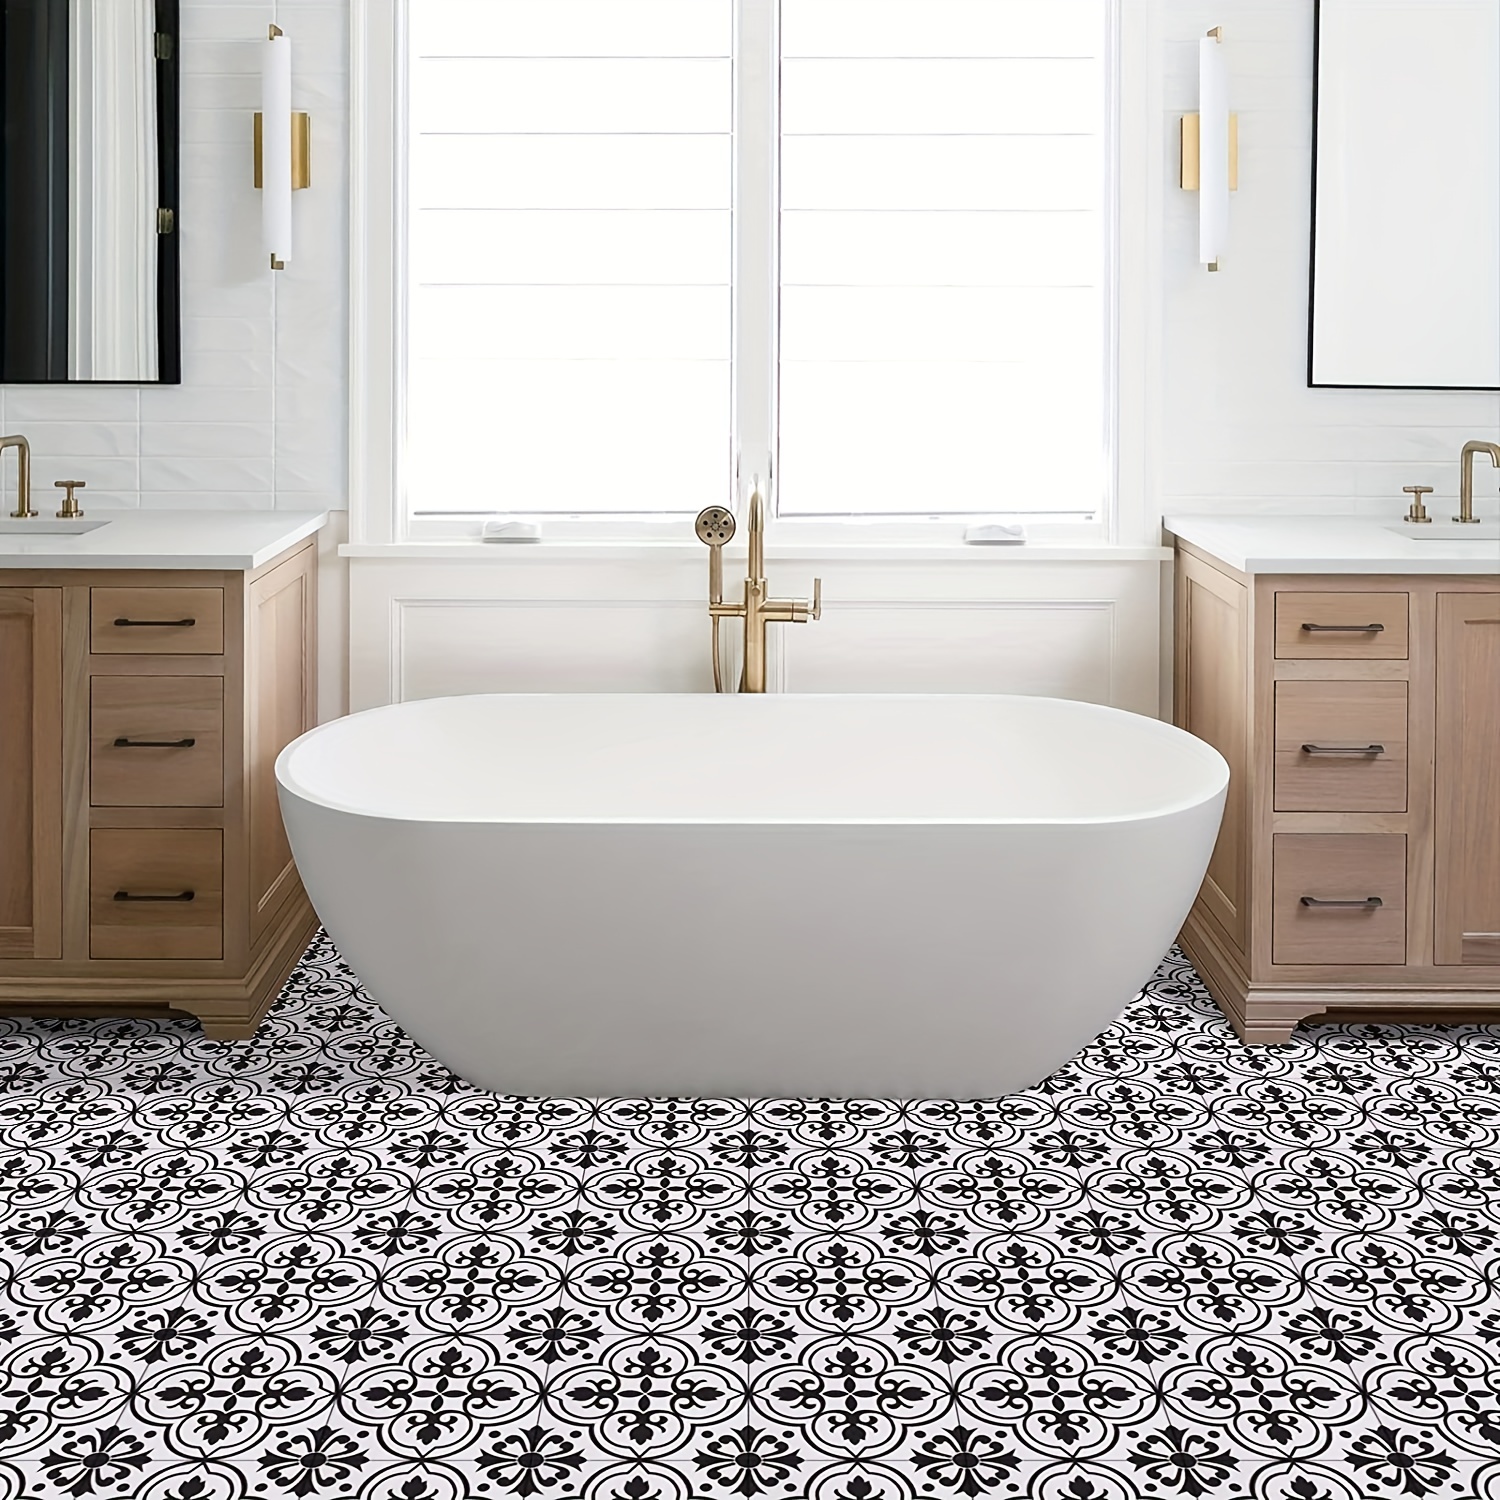 Transforming a Bathroom With Self-Adhesive Floor Tiles